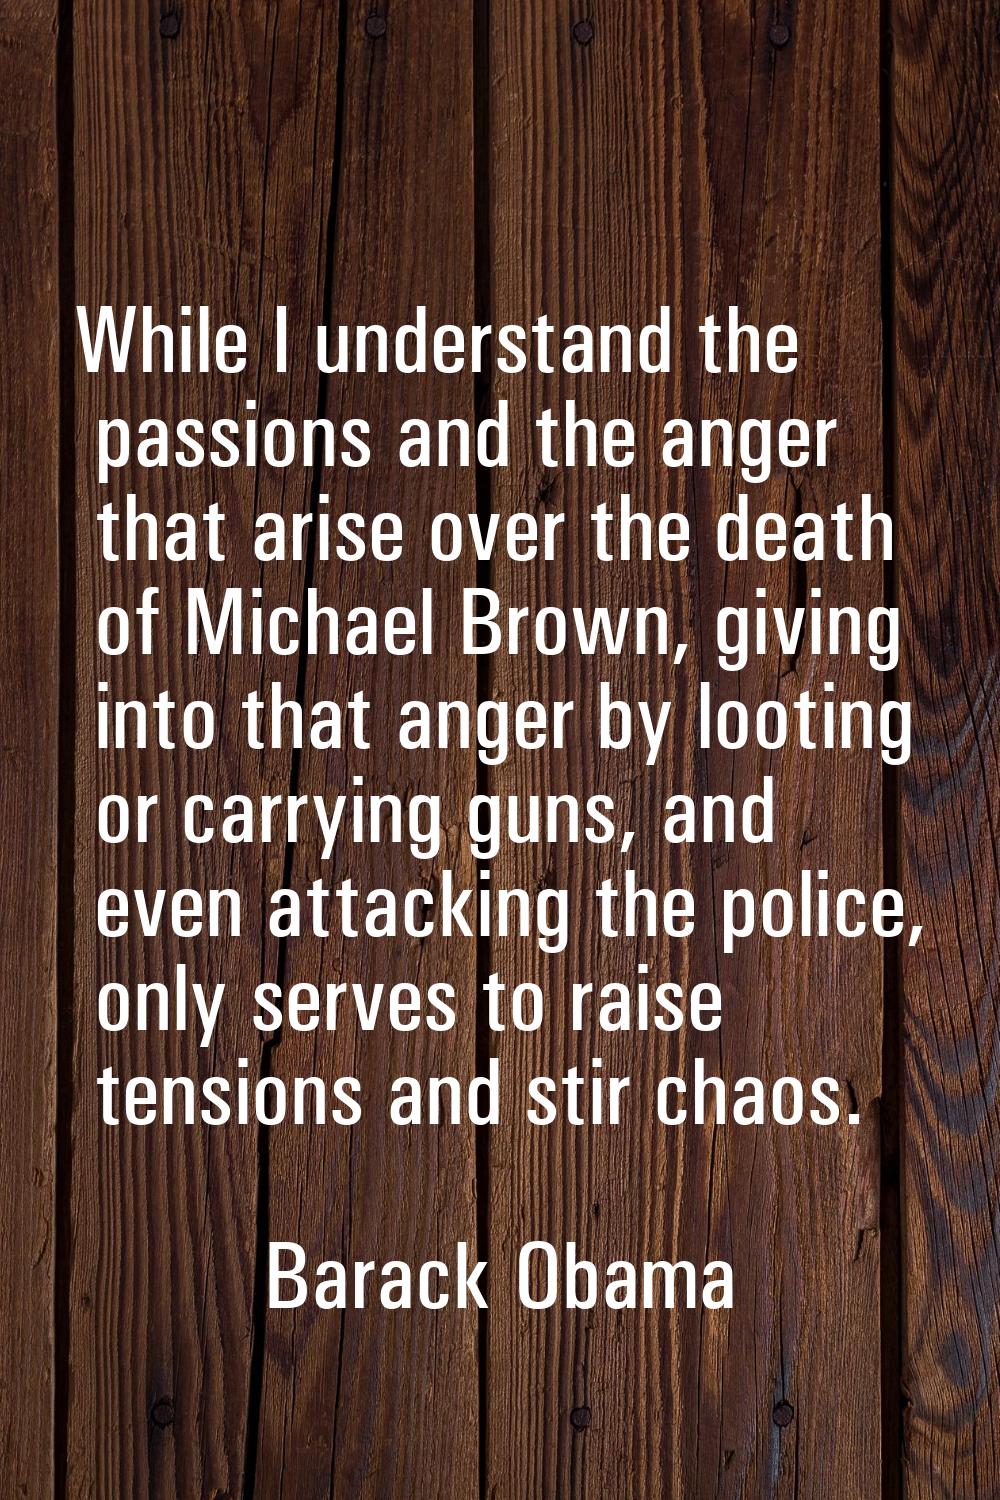 While I understand the passions and the anger that arise over the death of Michael Brown, giving in